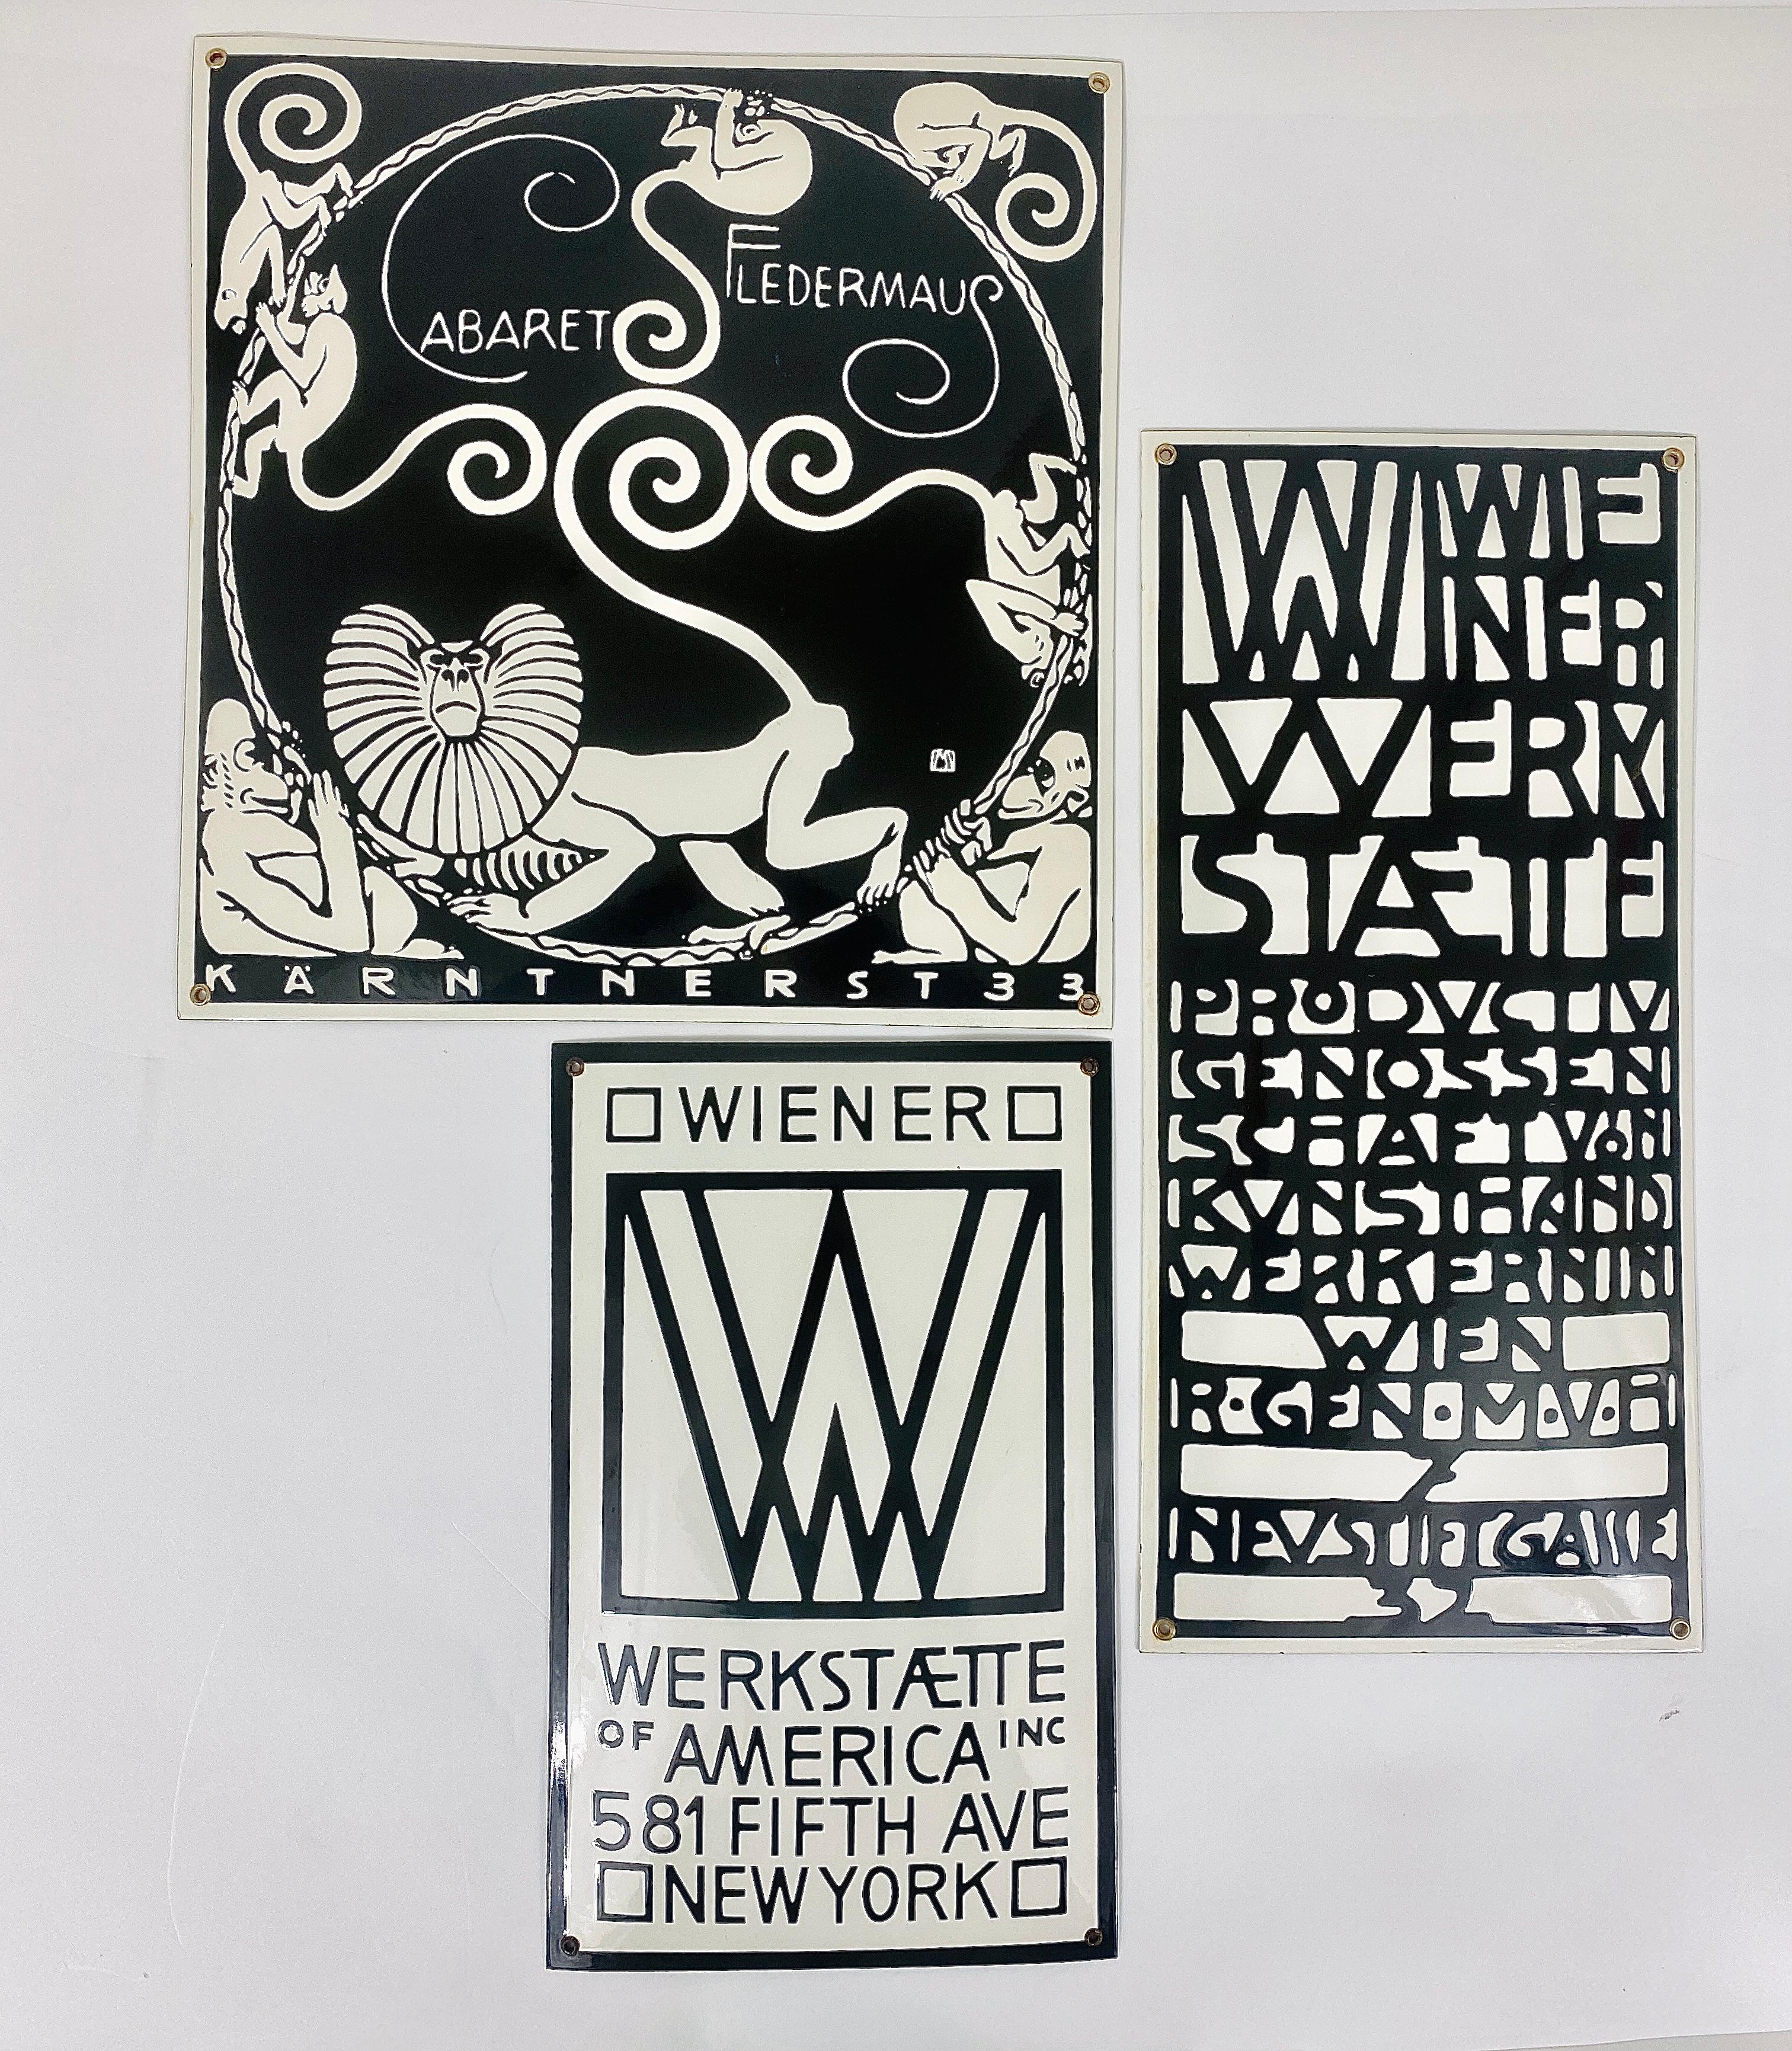 A rare, domed, black and white enameled Art Nouveau advertising sign for Wiener Werkstätte. 
(founded by Josef Hoffmann, Koloman Moser and Fritz Waerndorfer in 1903 in Vienna)

Wiener Werkstätte of America Inc 581 Fifth Ave New York

Designed